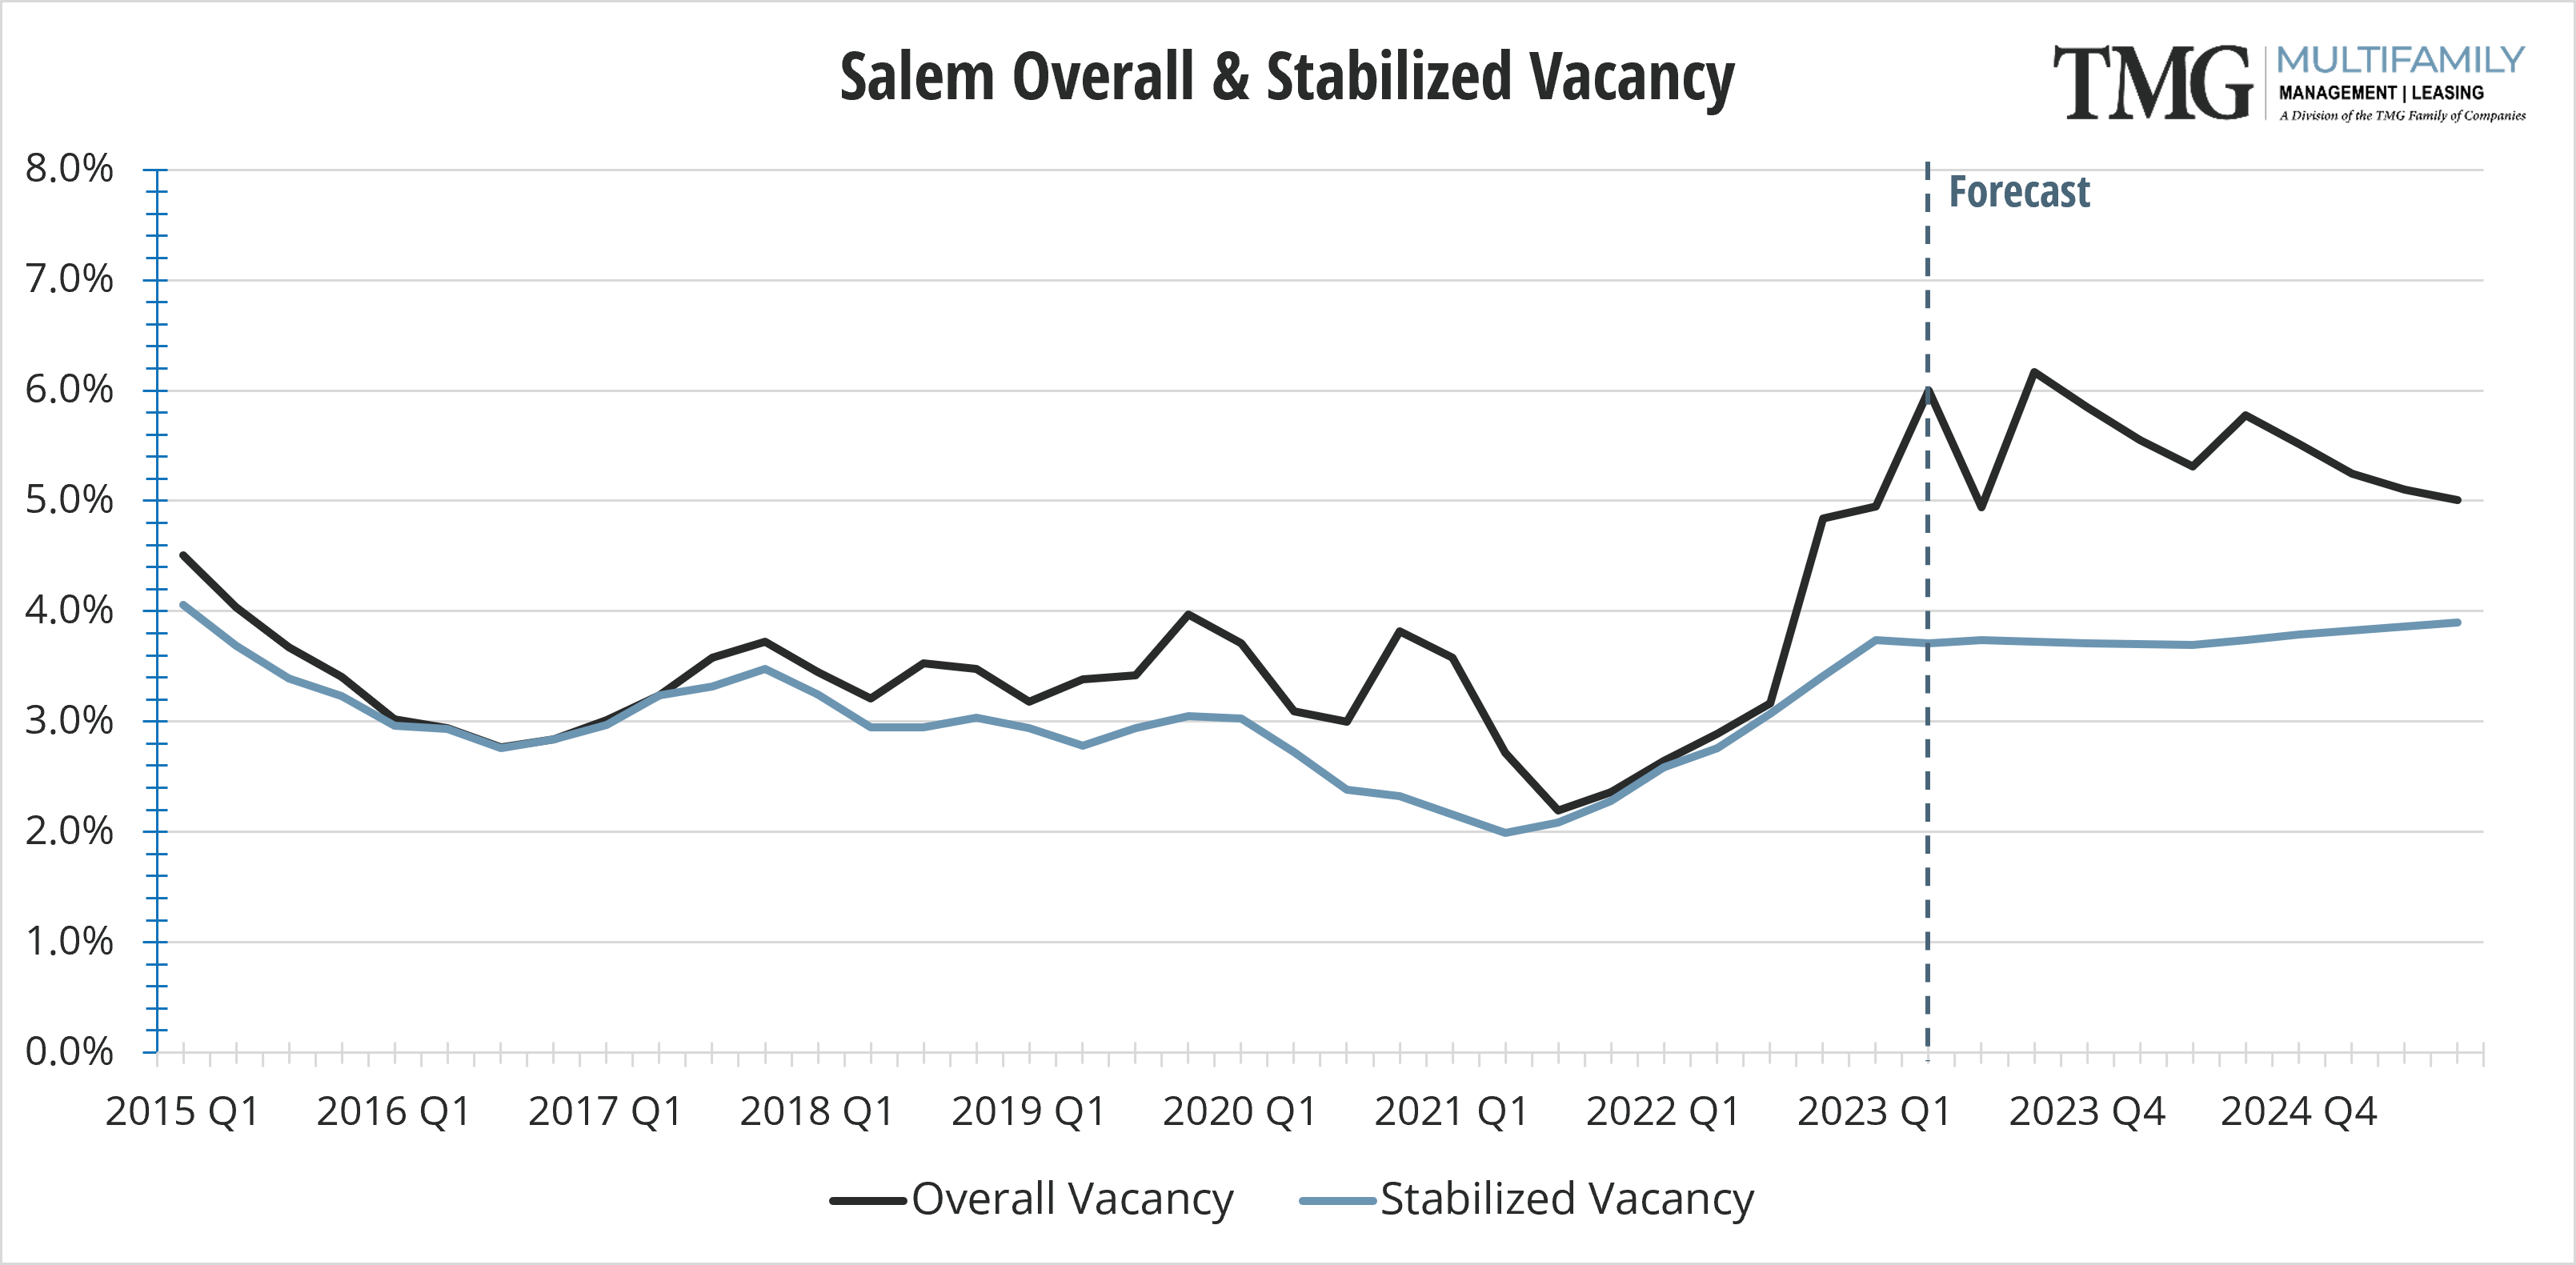 SAL Overall & Stabilized Vacancy